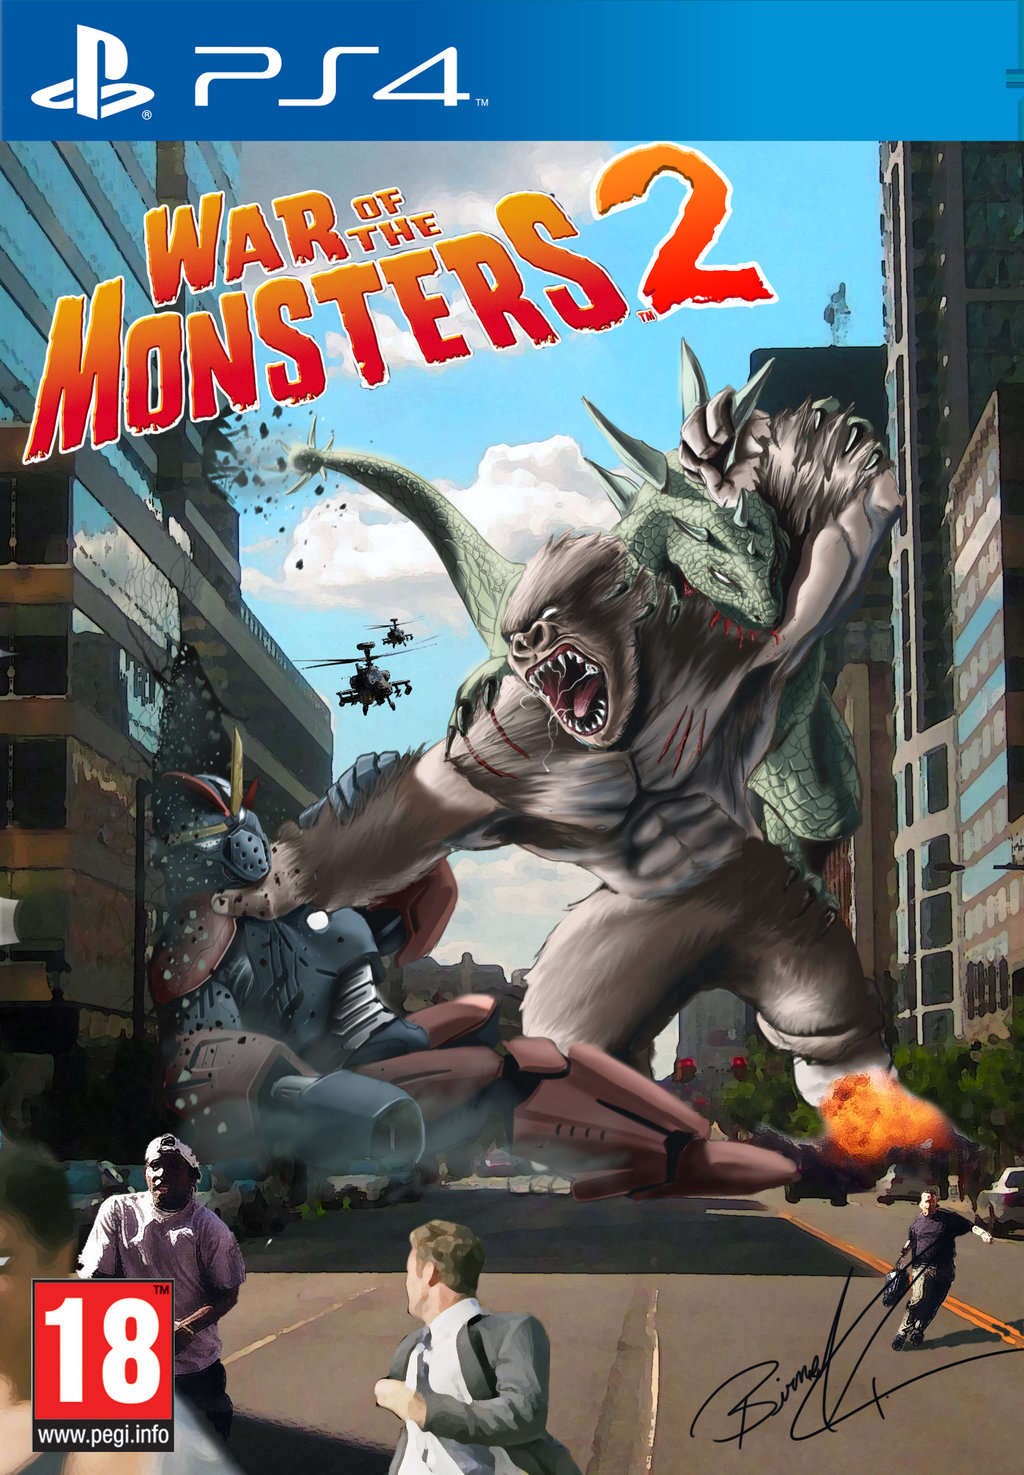 War Of The Monsters #20